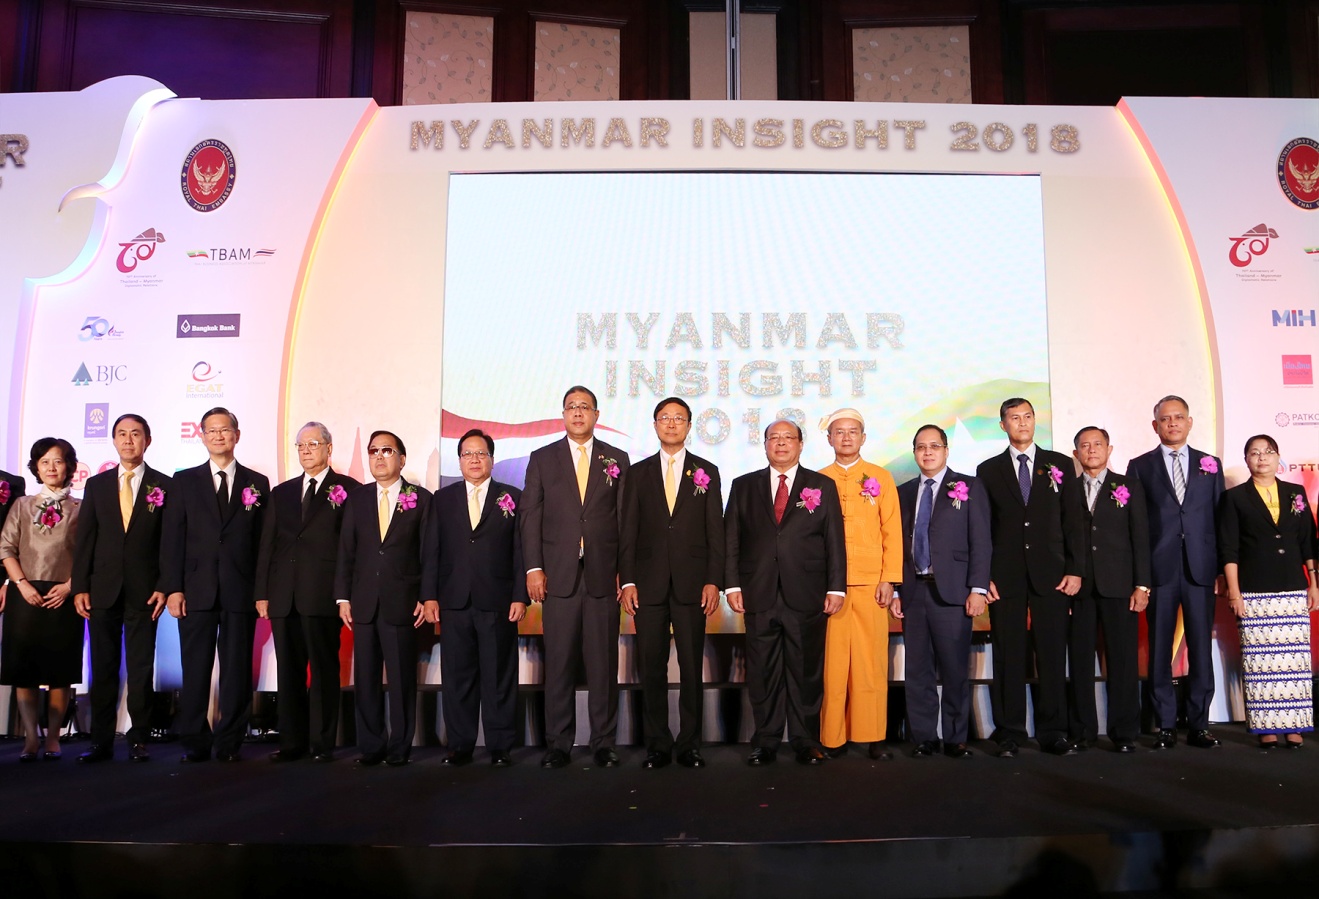 EXIM Thailand Joins Seminar on Myanmar Trade and Investment Insight to Commemorate 70 Years of Thailand-Myanmar Diplomatic Relations